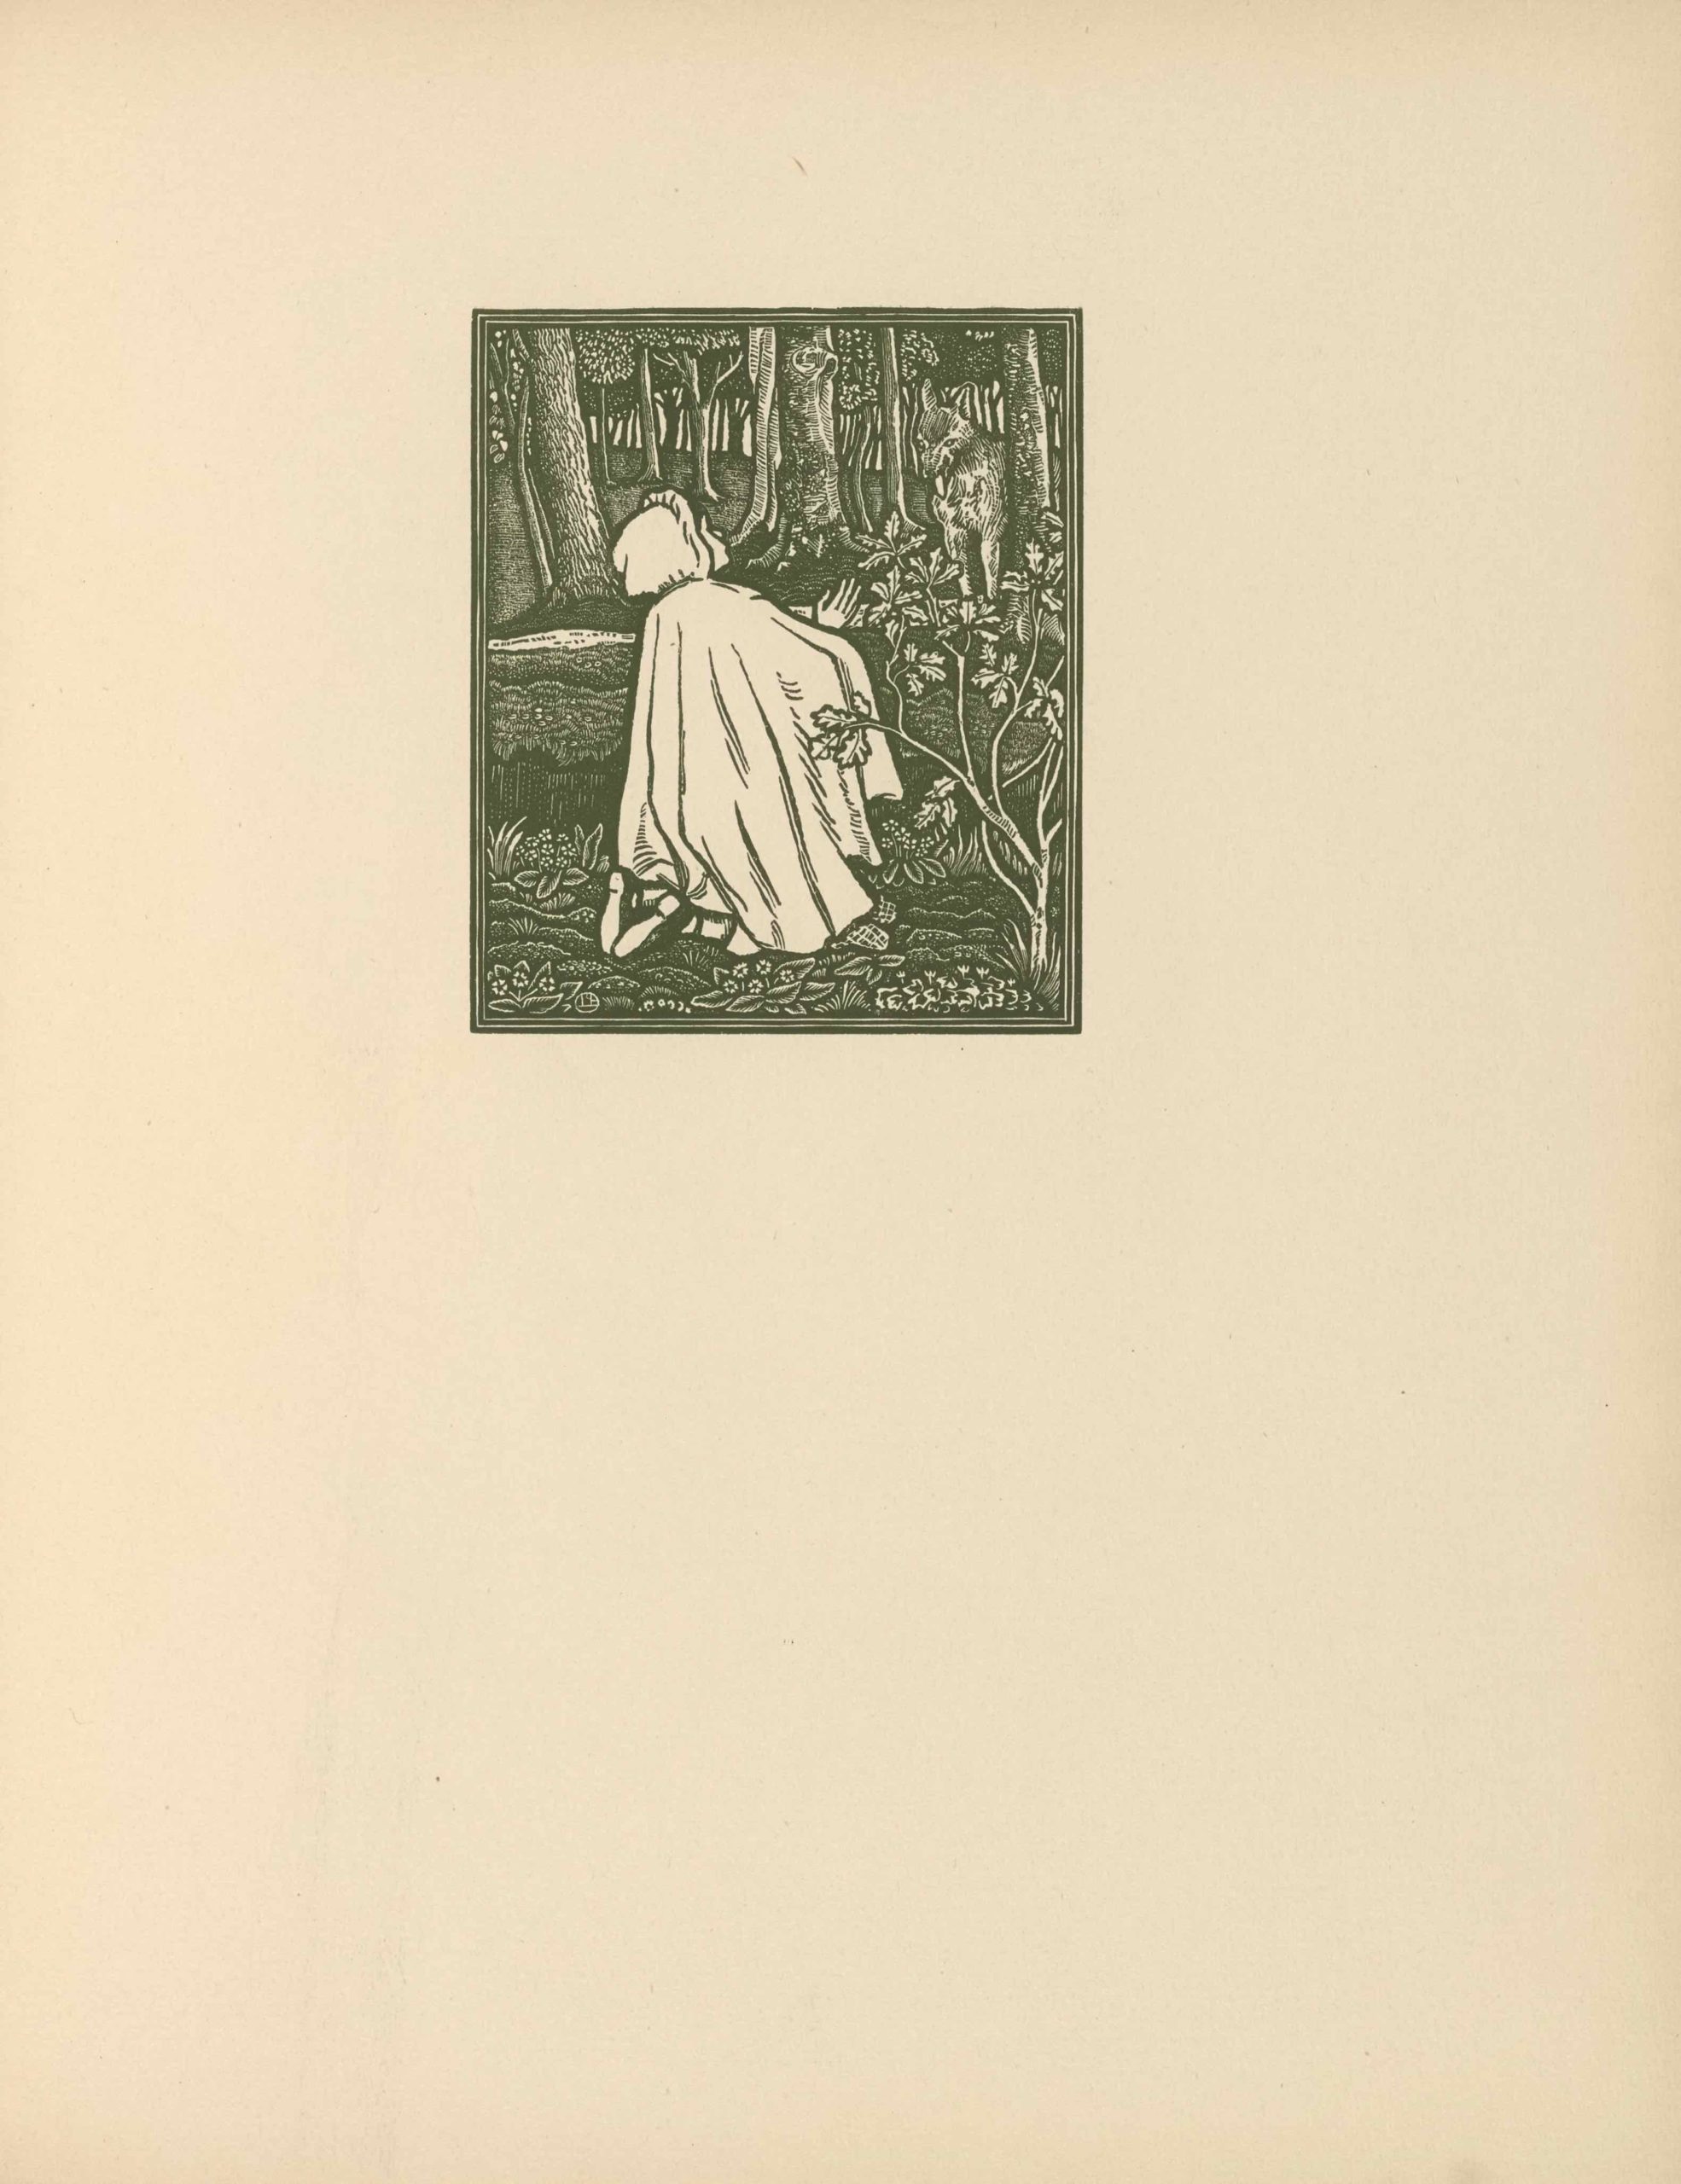 The woodcut is printed in black ink with a double line border, in portrait orientation. The image illustrates a scene from the story of Red Riding Hood. The girl kneels in the centre foreground with her back to the viewer and her face in profile to the right. She wears a hooded cape that covers the back of her head and extends down to her bent legs as well as long socks and shoes. Her right hand is raised towards the wolf who is between two trees in the upper right corner of the picture plane, standing on all four legs. The wolf looks back towards the girl with his ears pricked up and his tongue hanging out. From the bottom right corner a sapling oak tree rises, some of its branches extending in front of the girl and the wolf. In the extreme foreground, the forest floor is covered in flowers. Between the girl and the wolf, a small stream flows horizontally across the frame. The background is dense with tree trunks and branches.